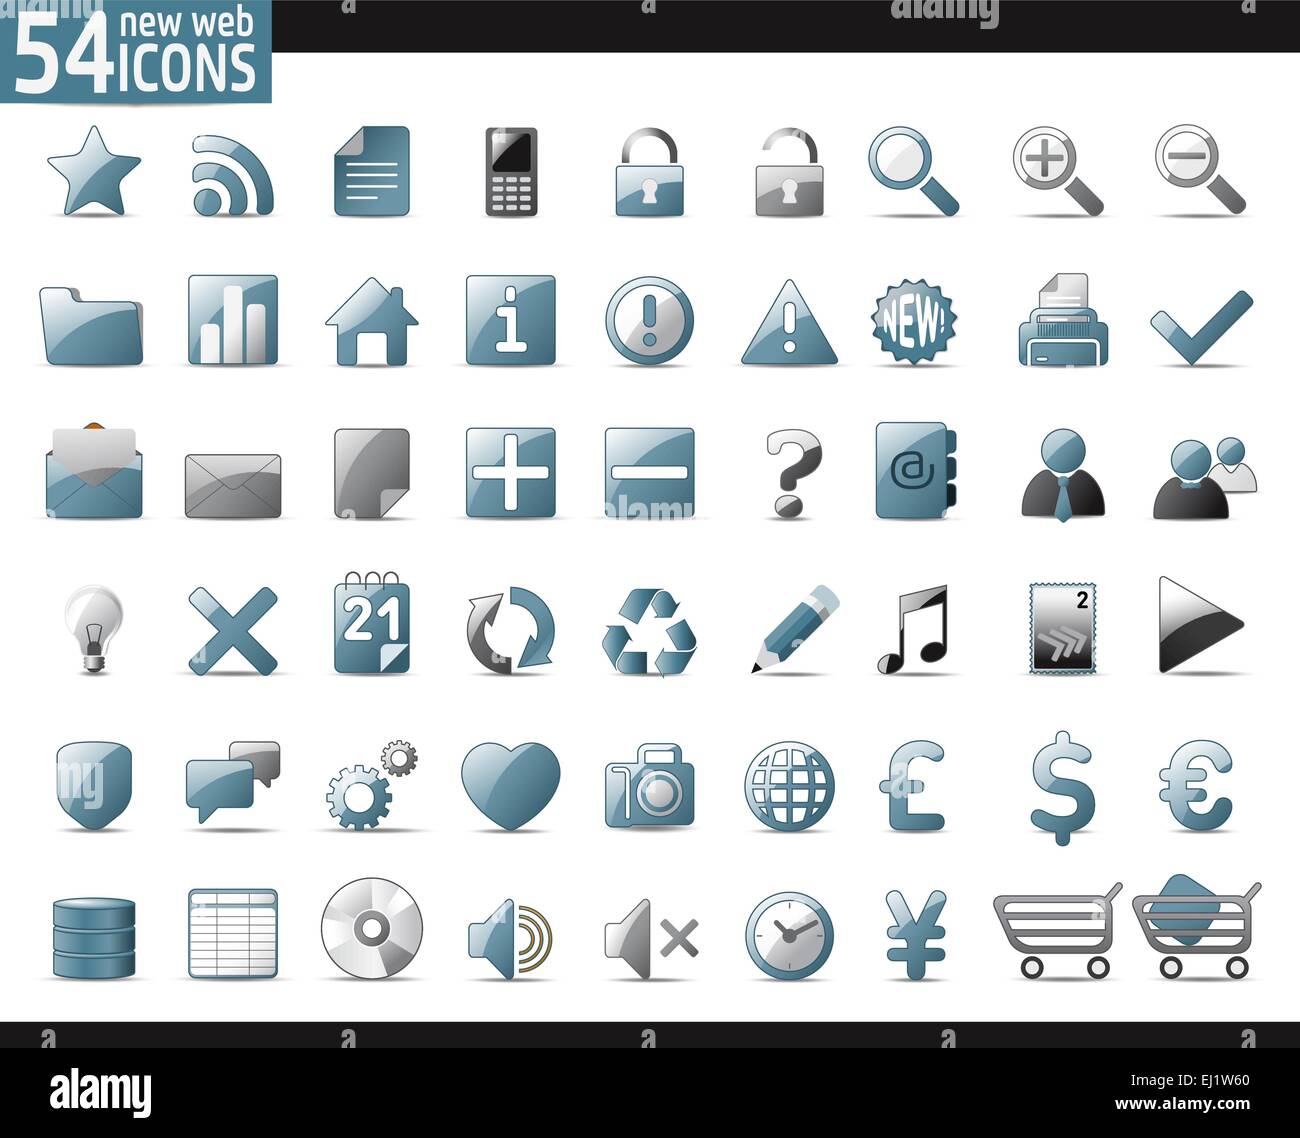 54 Cold Gray Web Icons for your internet sites Stock Vector